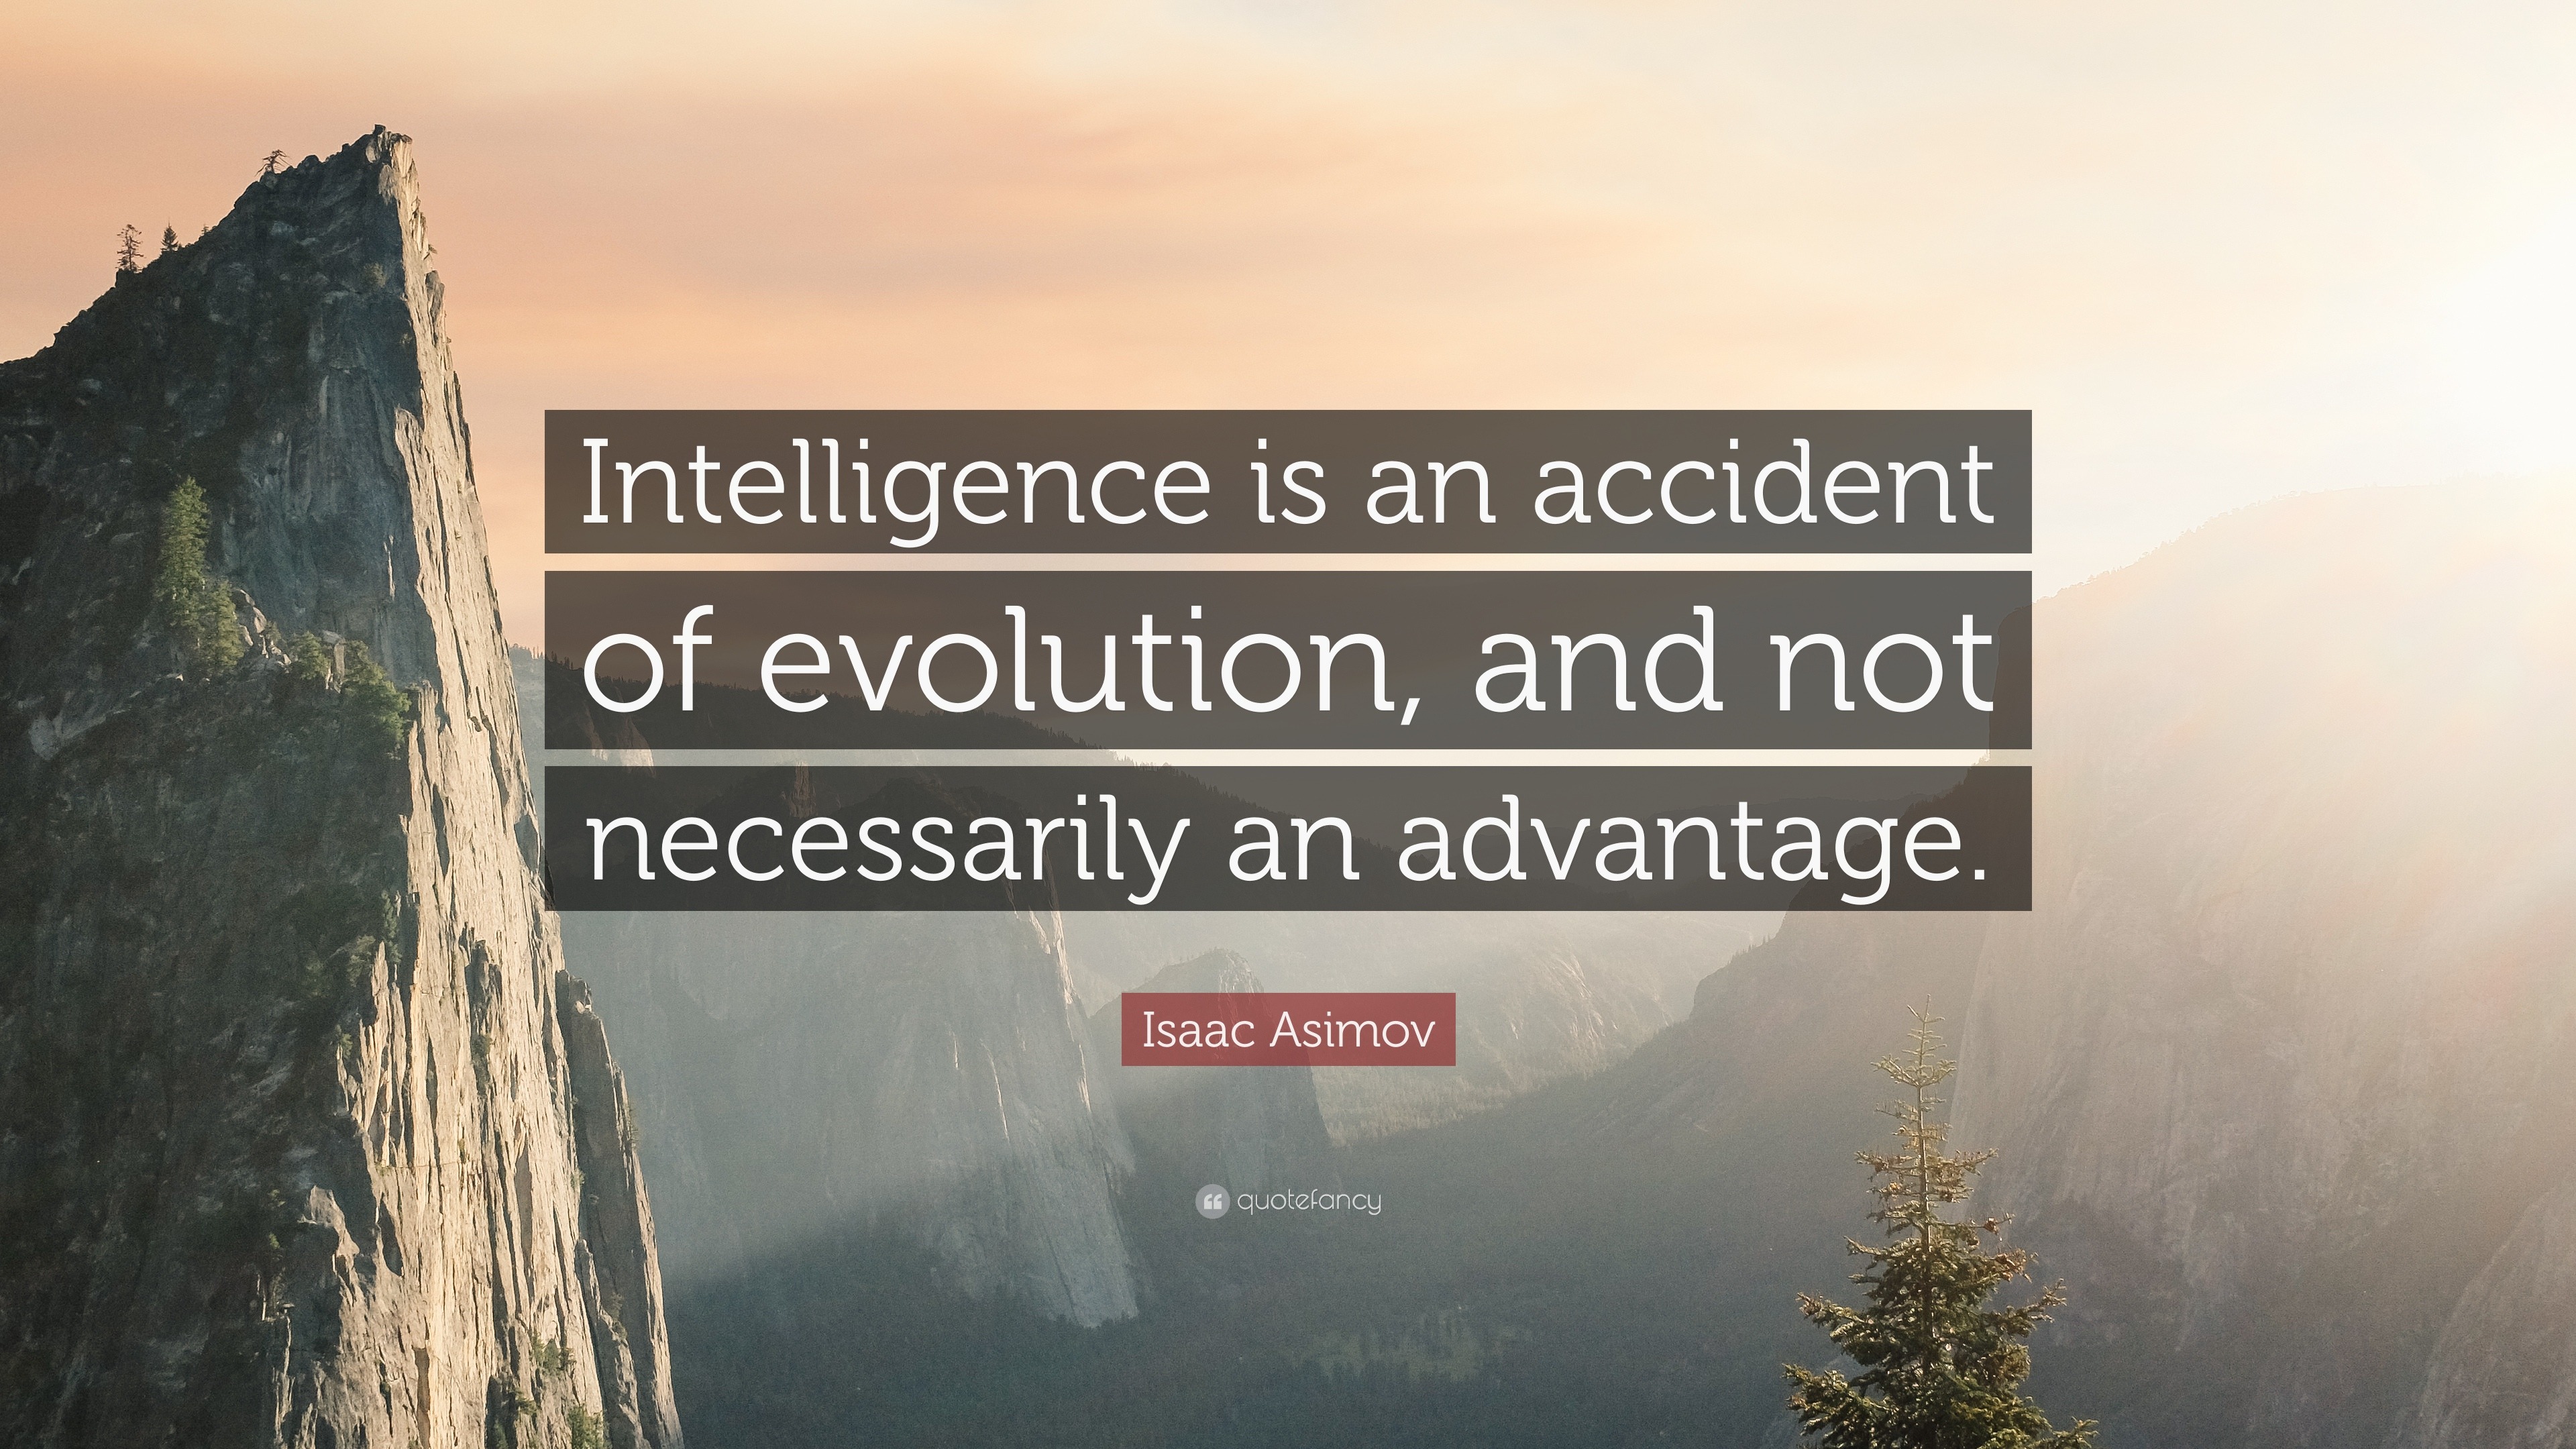 Isaac Asimov Quote: “Intelligence is an accident of evolution, and not ...